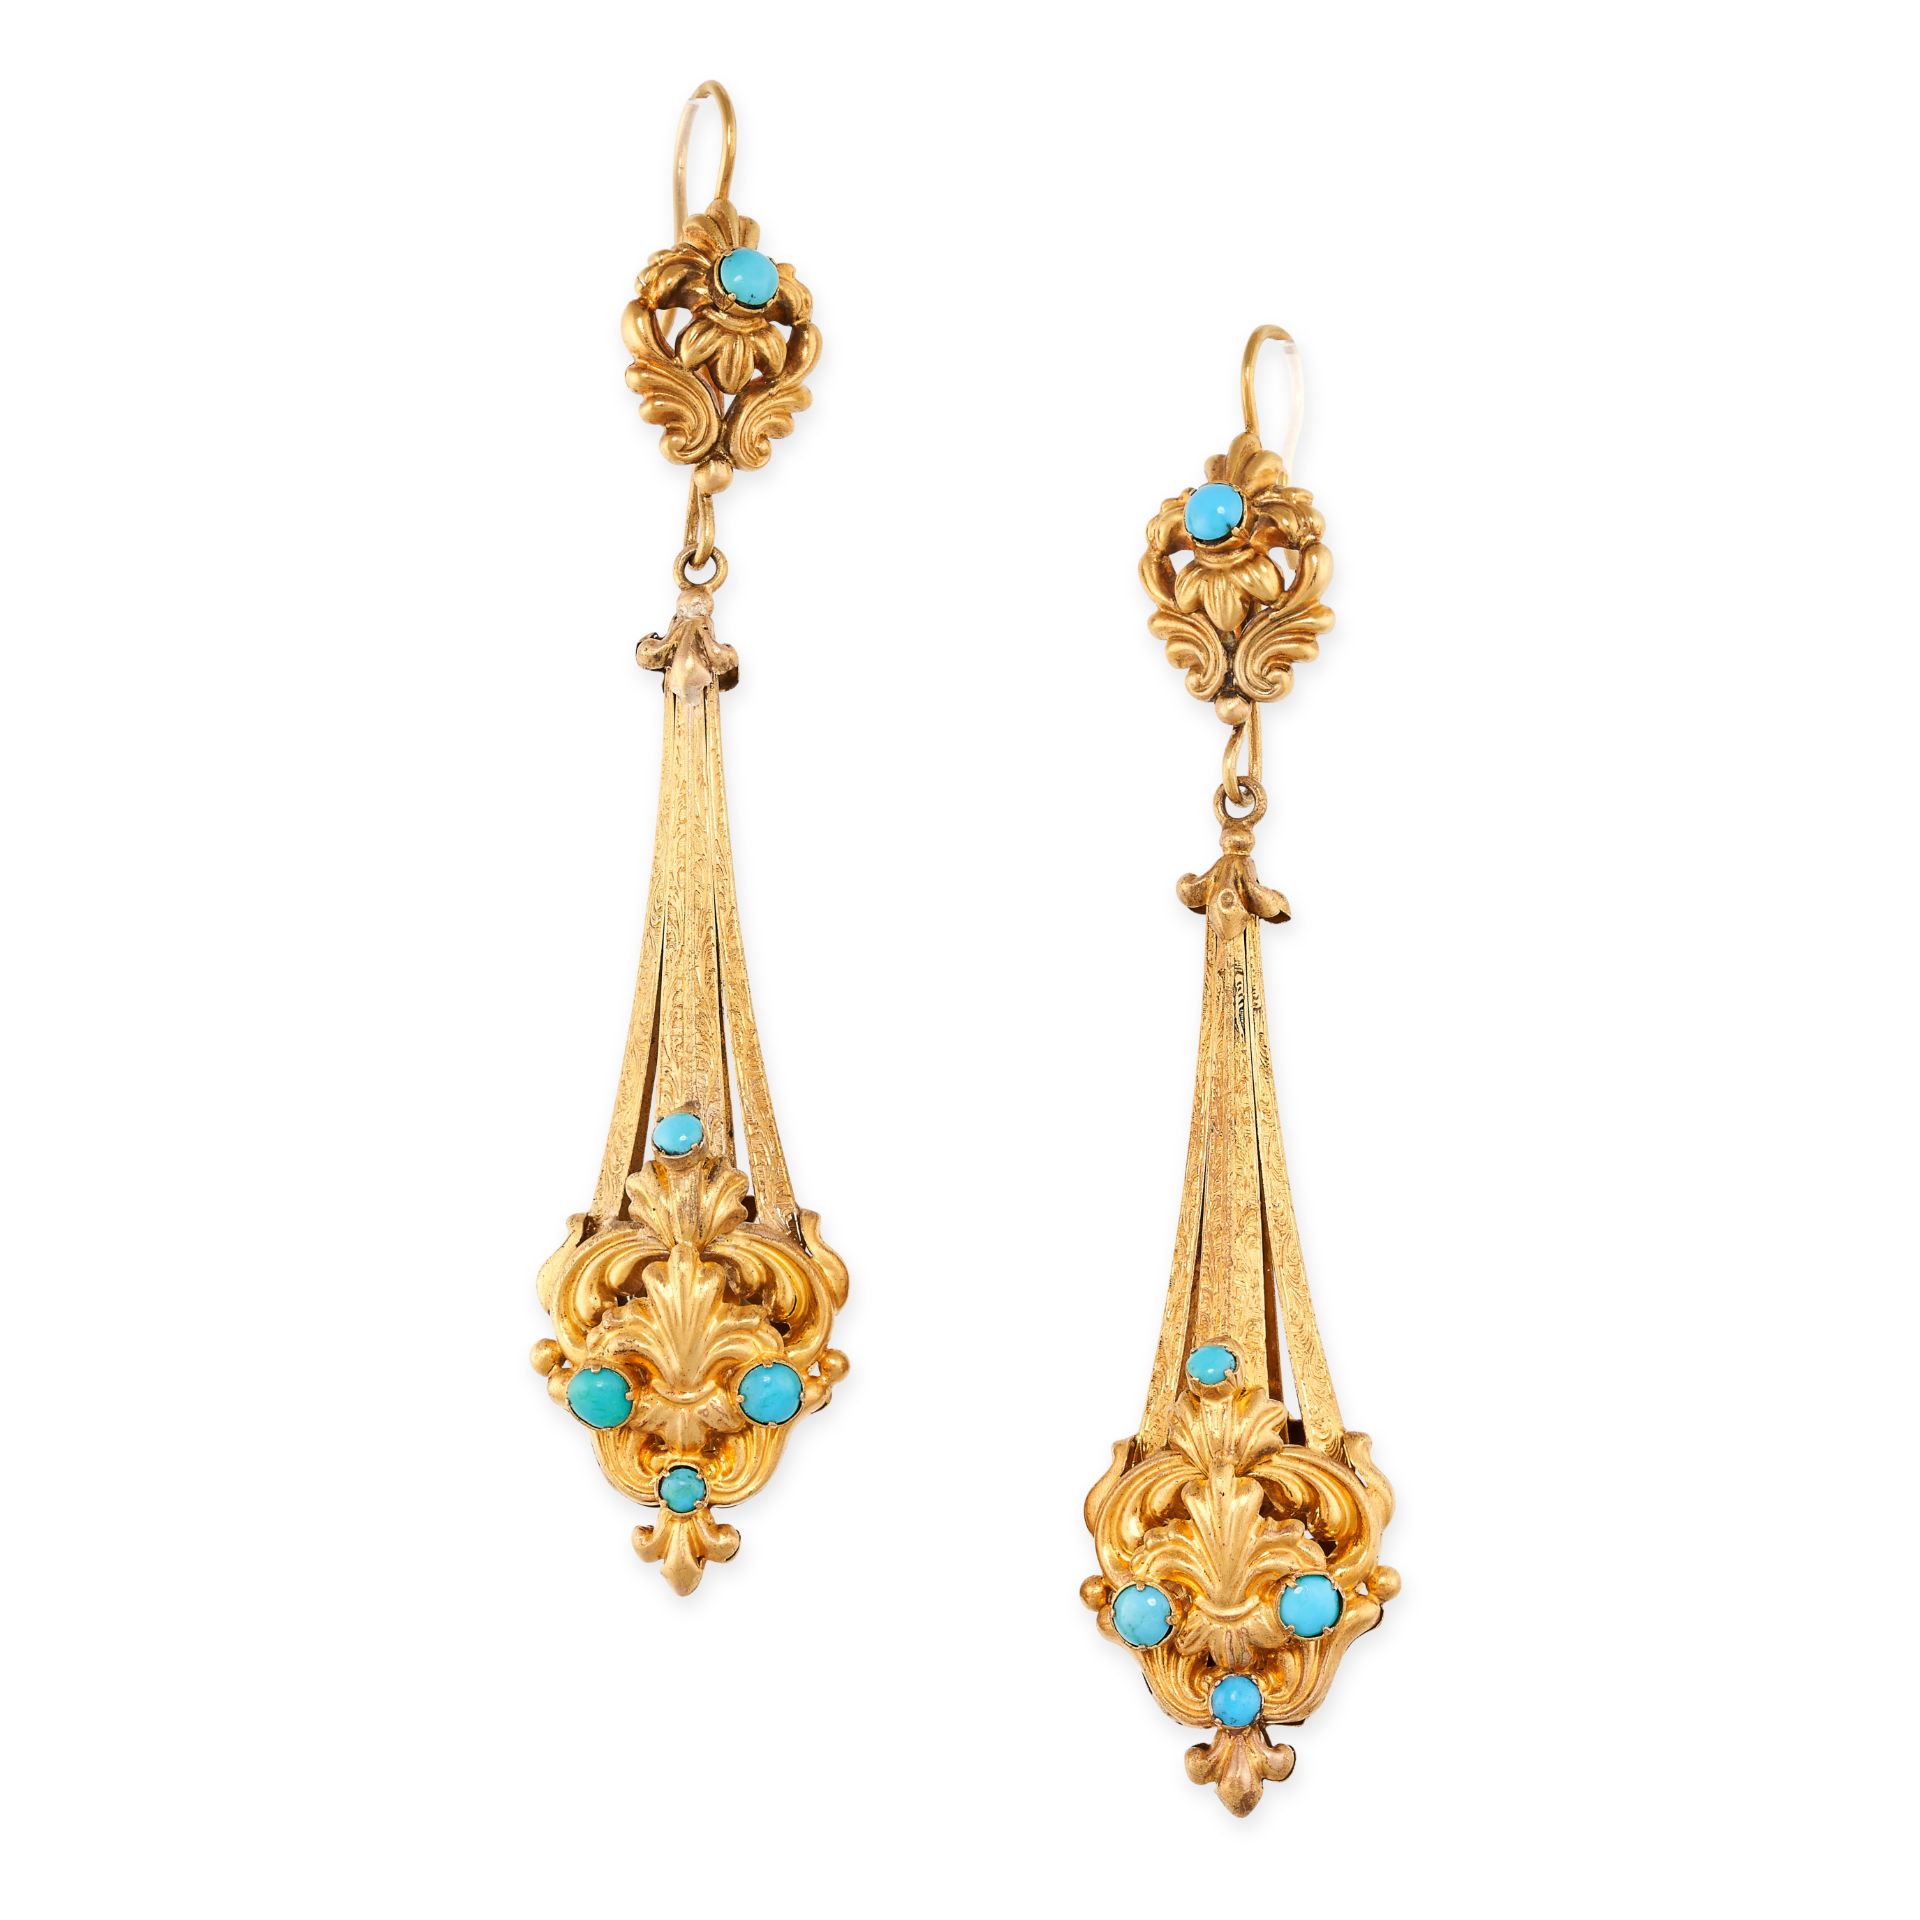 A PAIR OF ANTIQUE TURQUOISE EARRINGS, 19TH CENTURY in yellow gold, the tapering bodies set with